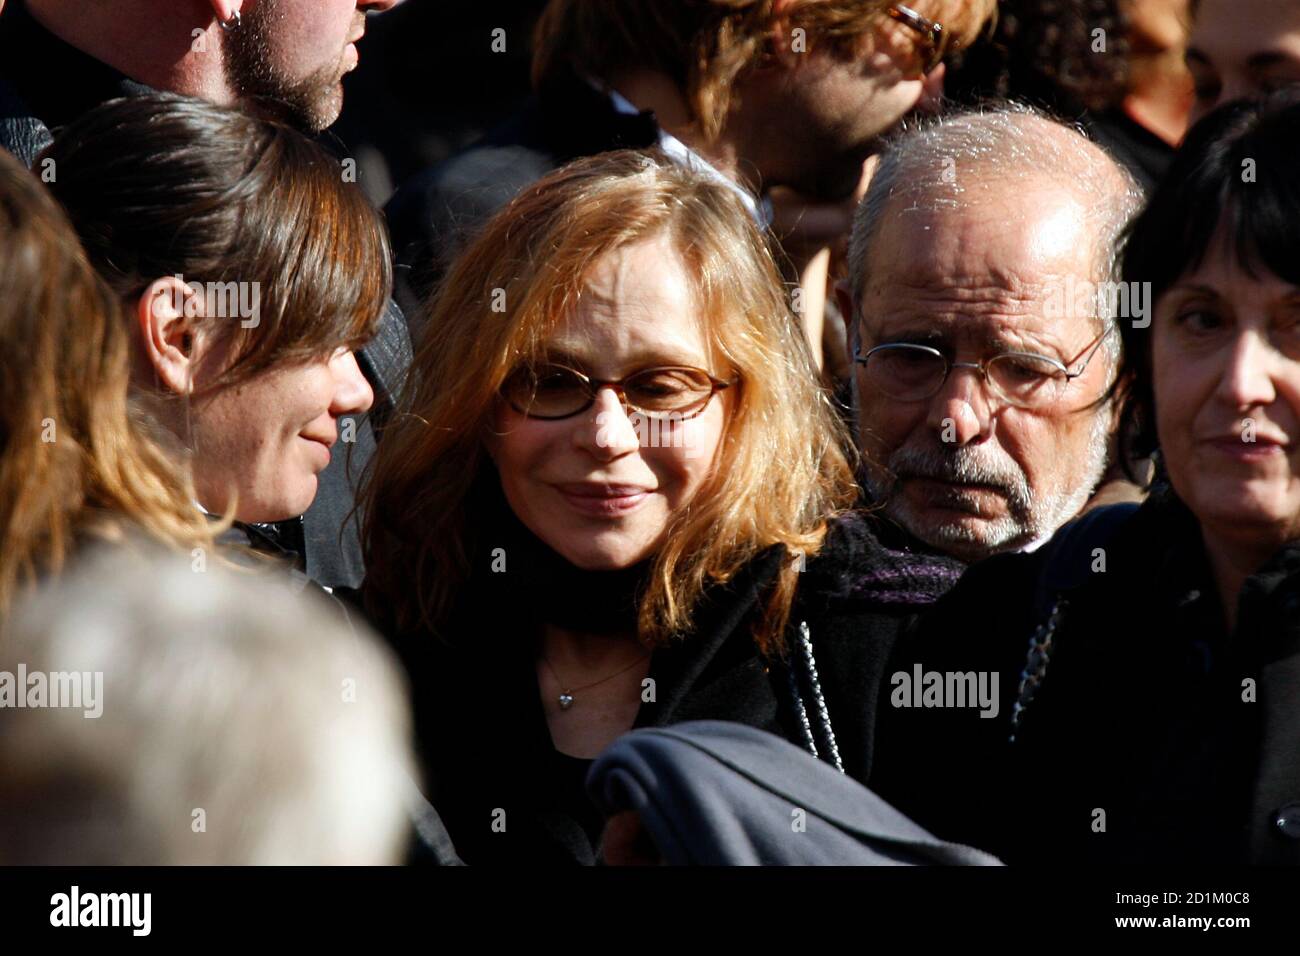 Elisabeth Depardieu Leaves The Church After The Funeral Ceremony For Her Son French Actor Guillaume Depardieu In Bougival Near Paris October 17 08 French Film Star Gerard Depardieu S Son Guillaume A 37